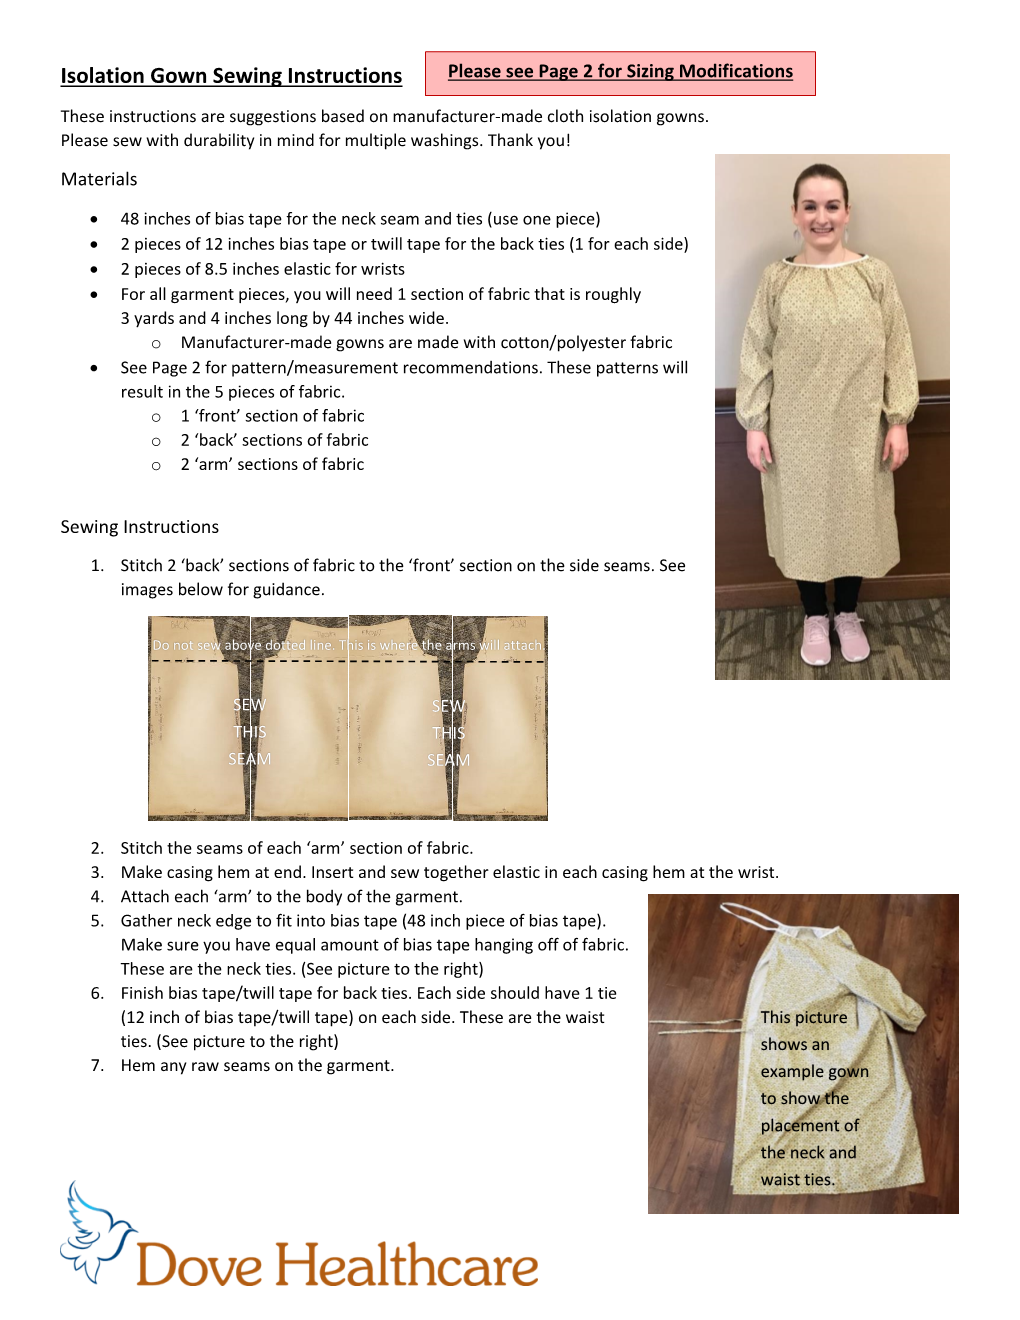 Isolation Gown Sewing Instructions Please See Page 2 for Sizing Modifications